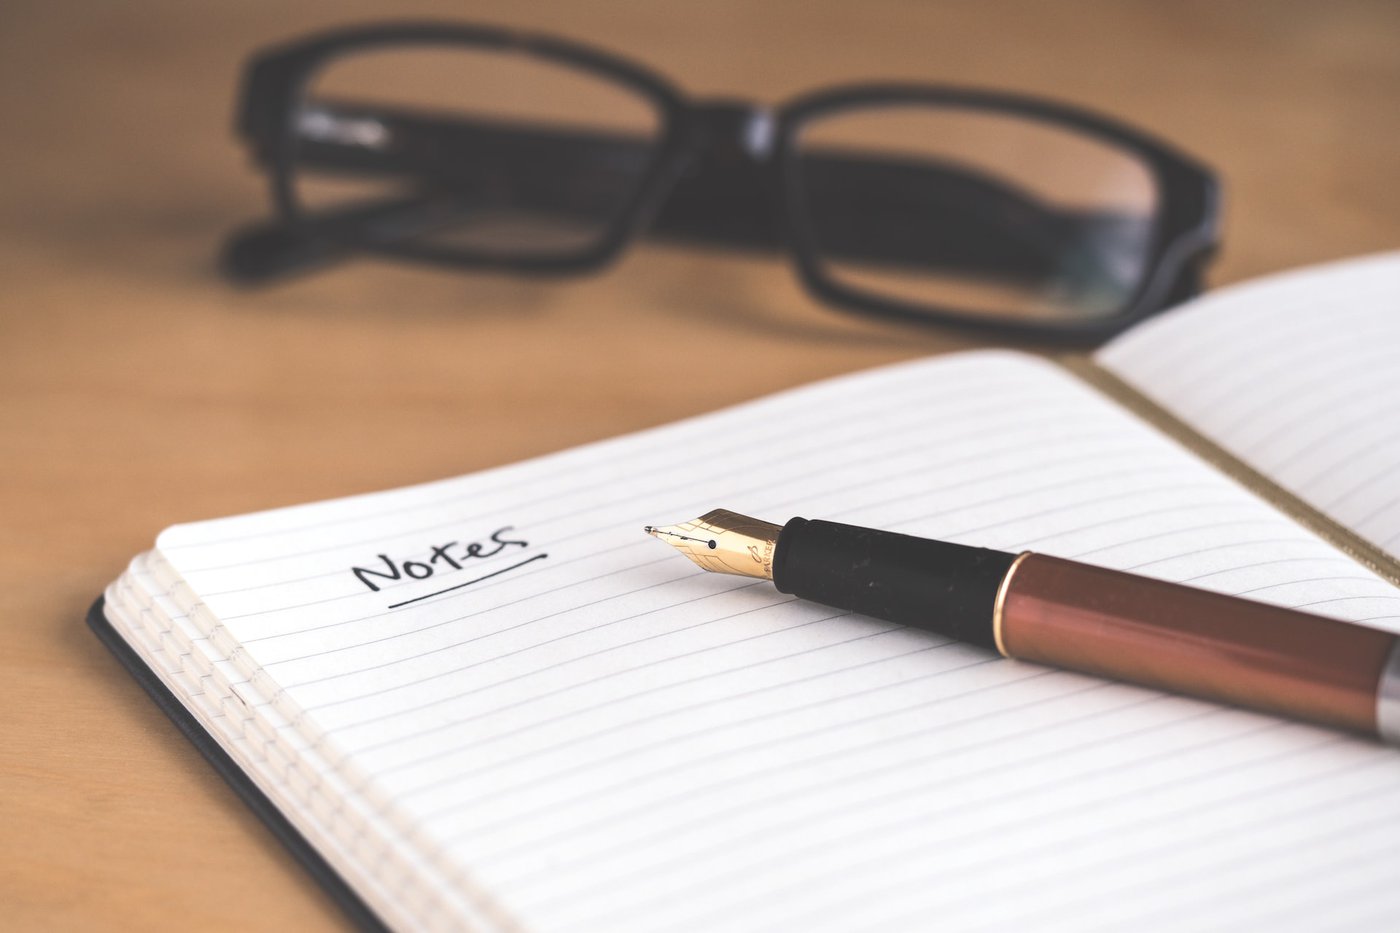 IMAGE DESCRIPTION: A notebook open with a pen sitting on top. The word "Notes" is written on the top of the page and underlined. Behind the notebook are a pair of reading glasses.